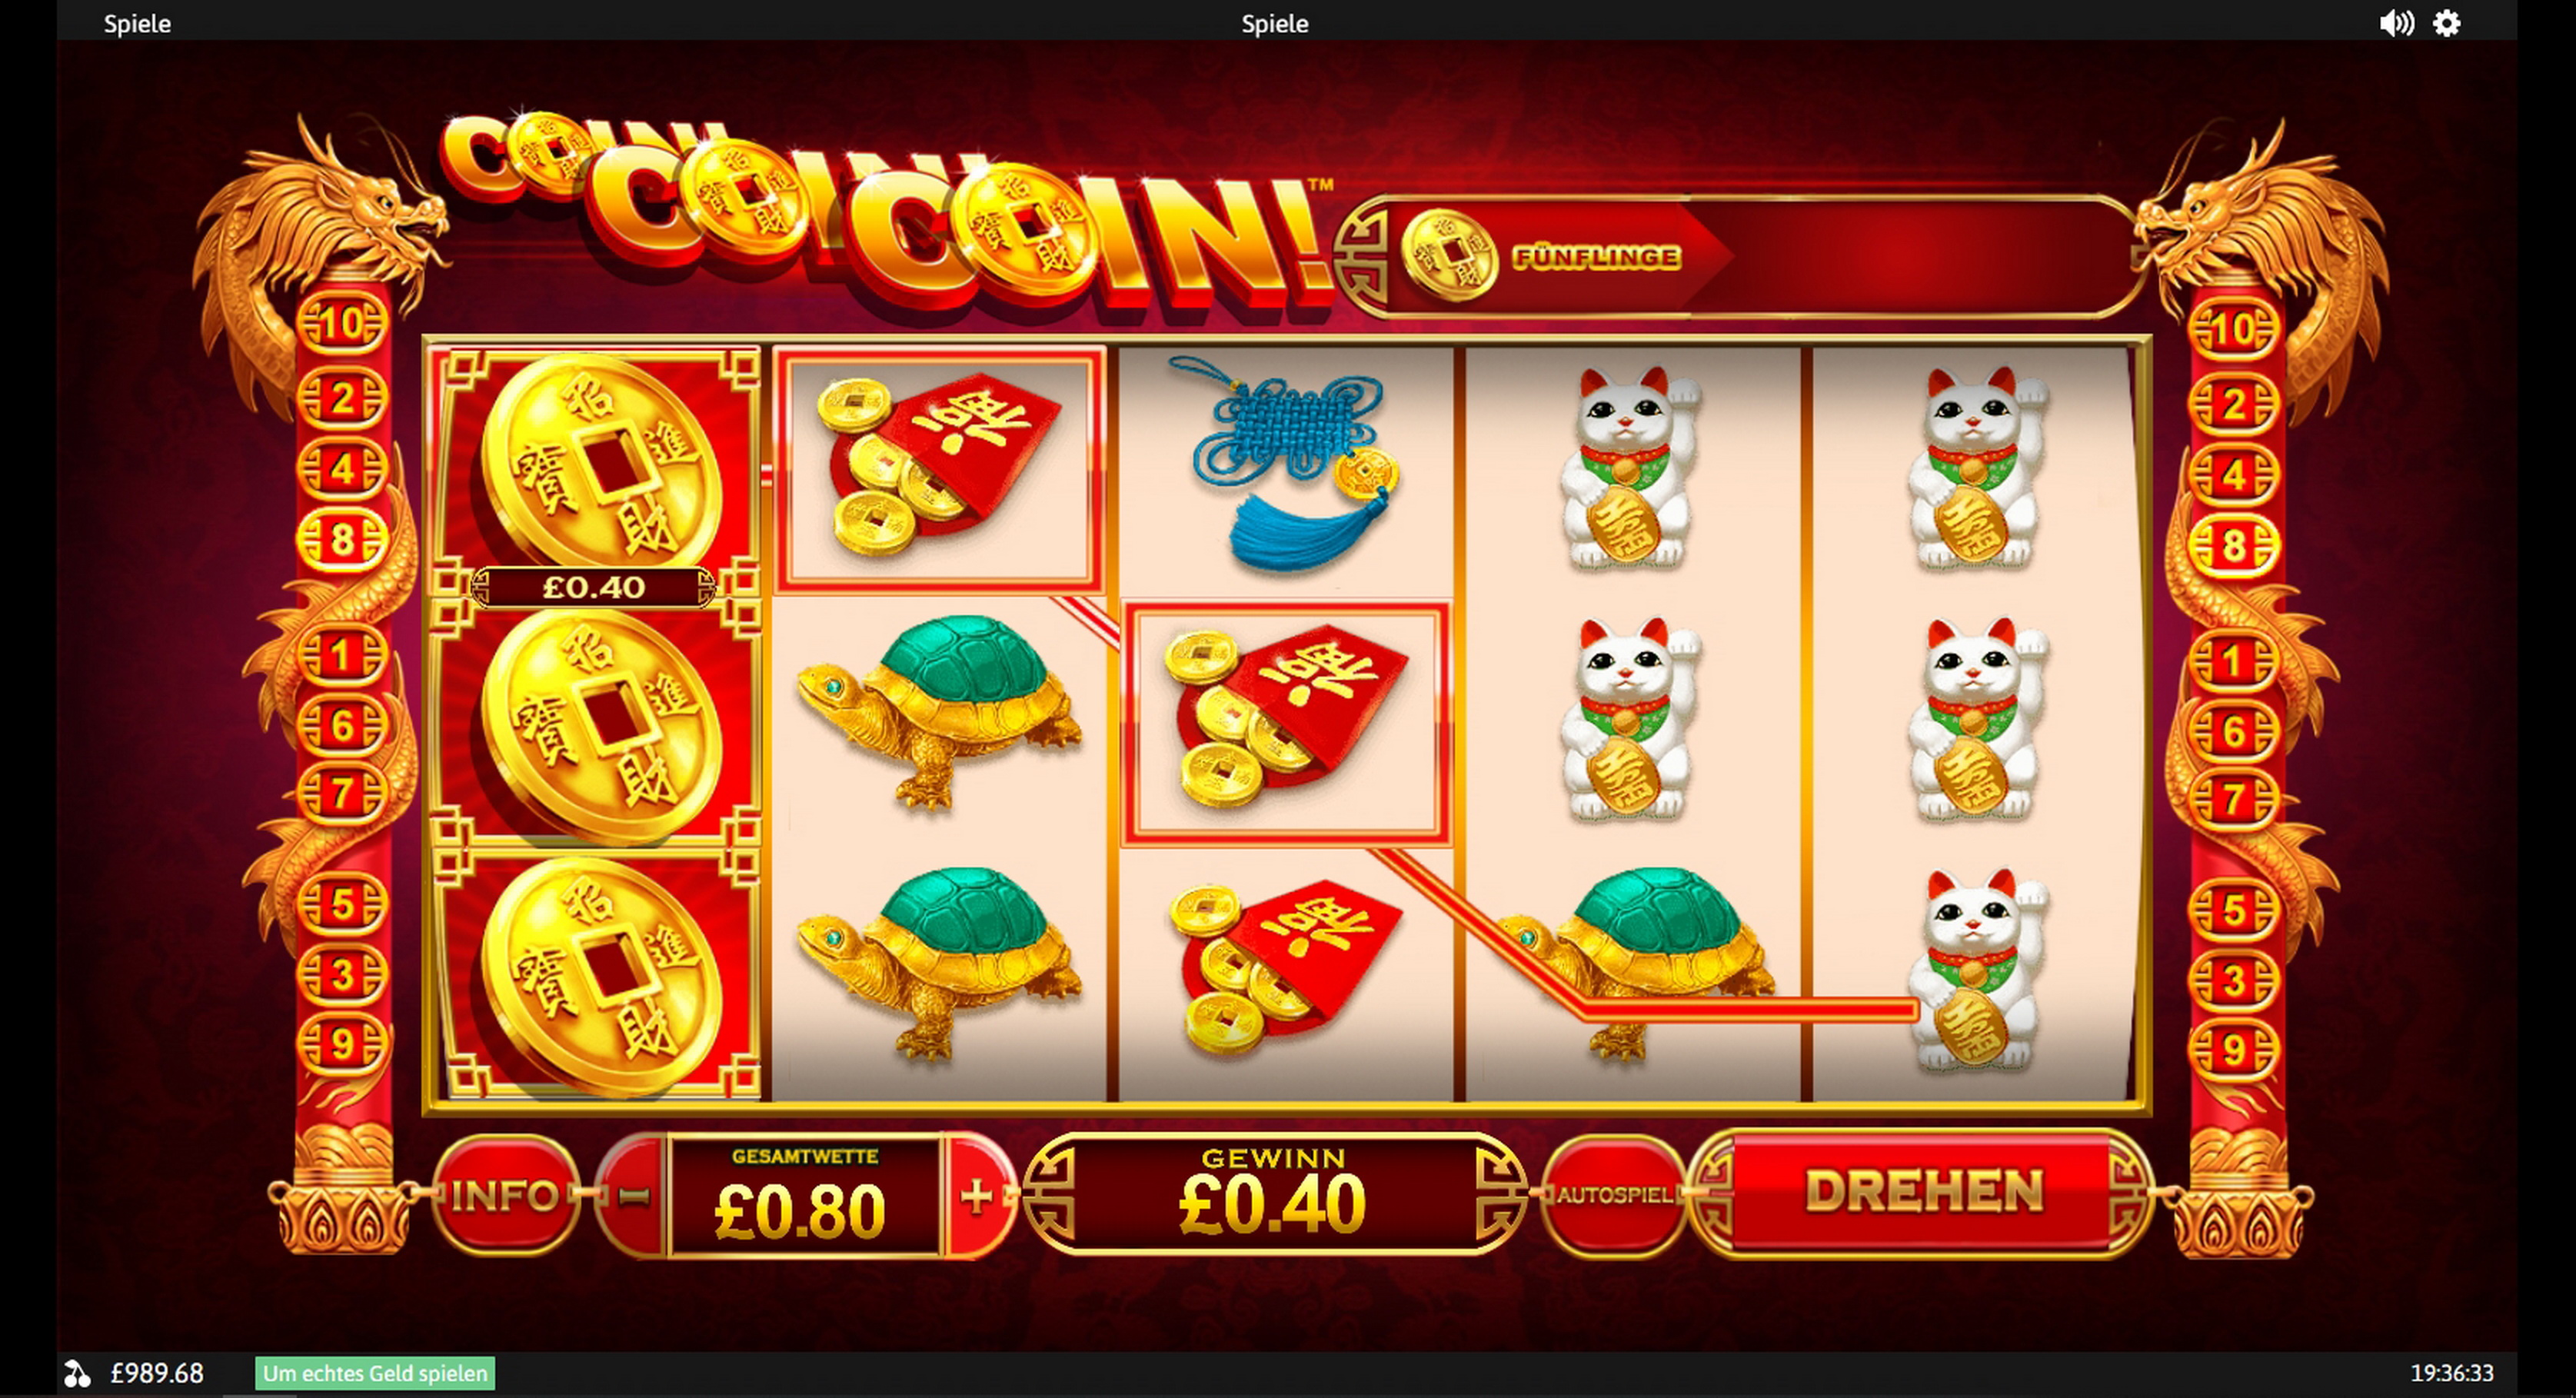 Win Money in Coin! Coin! Coin! Free Slot Game by Playtech